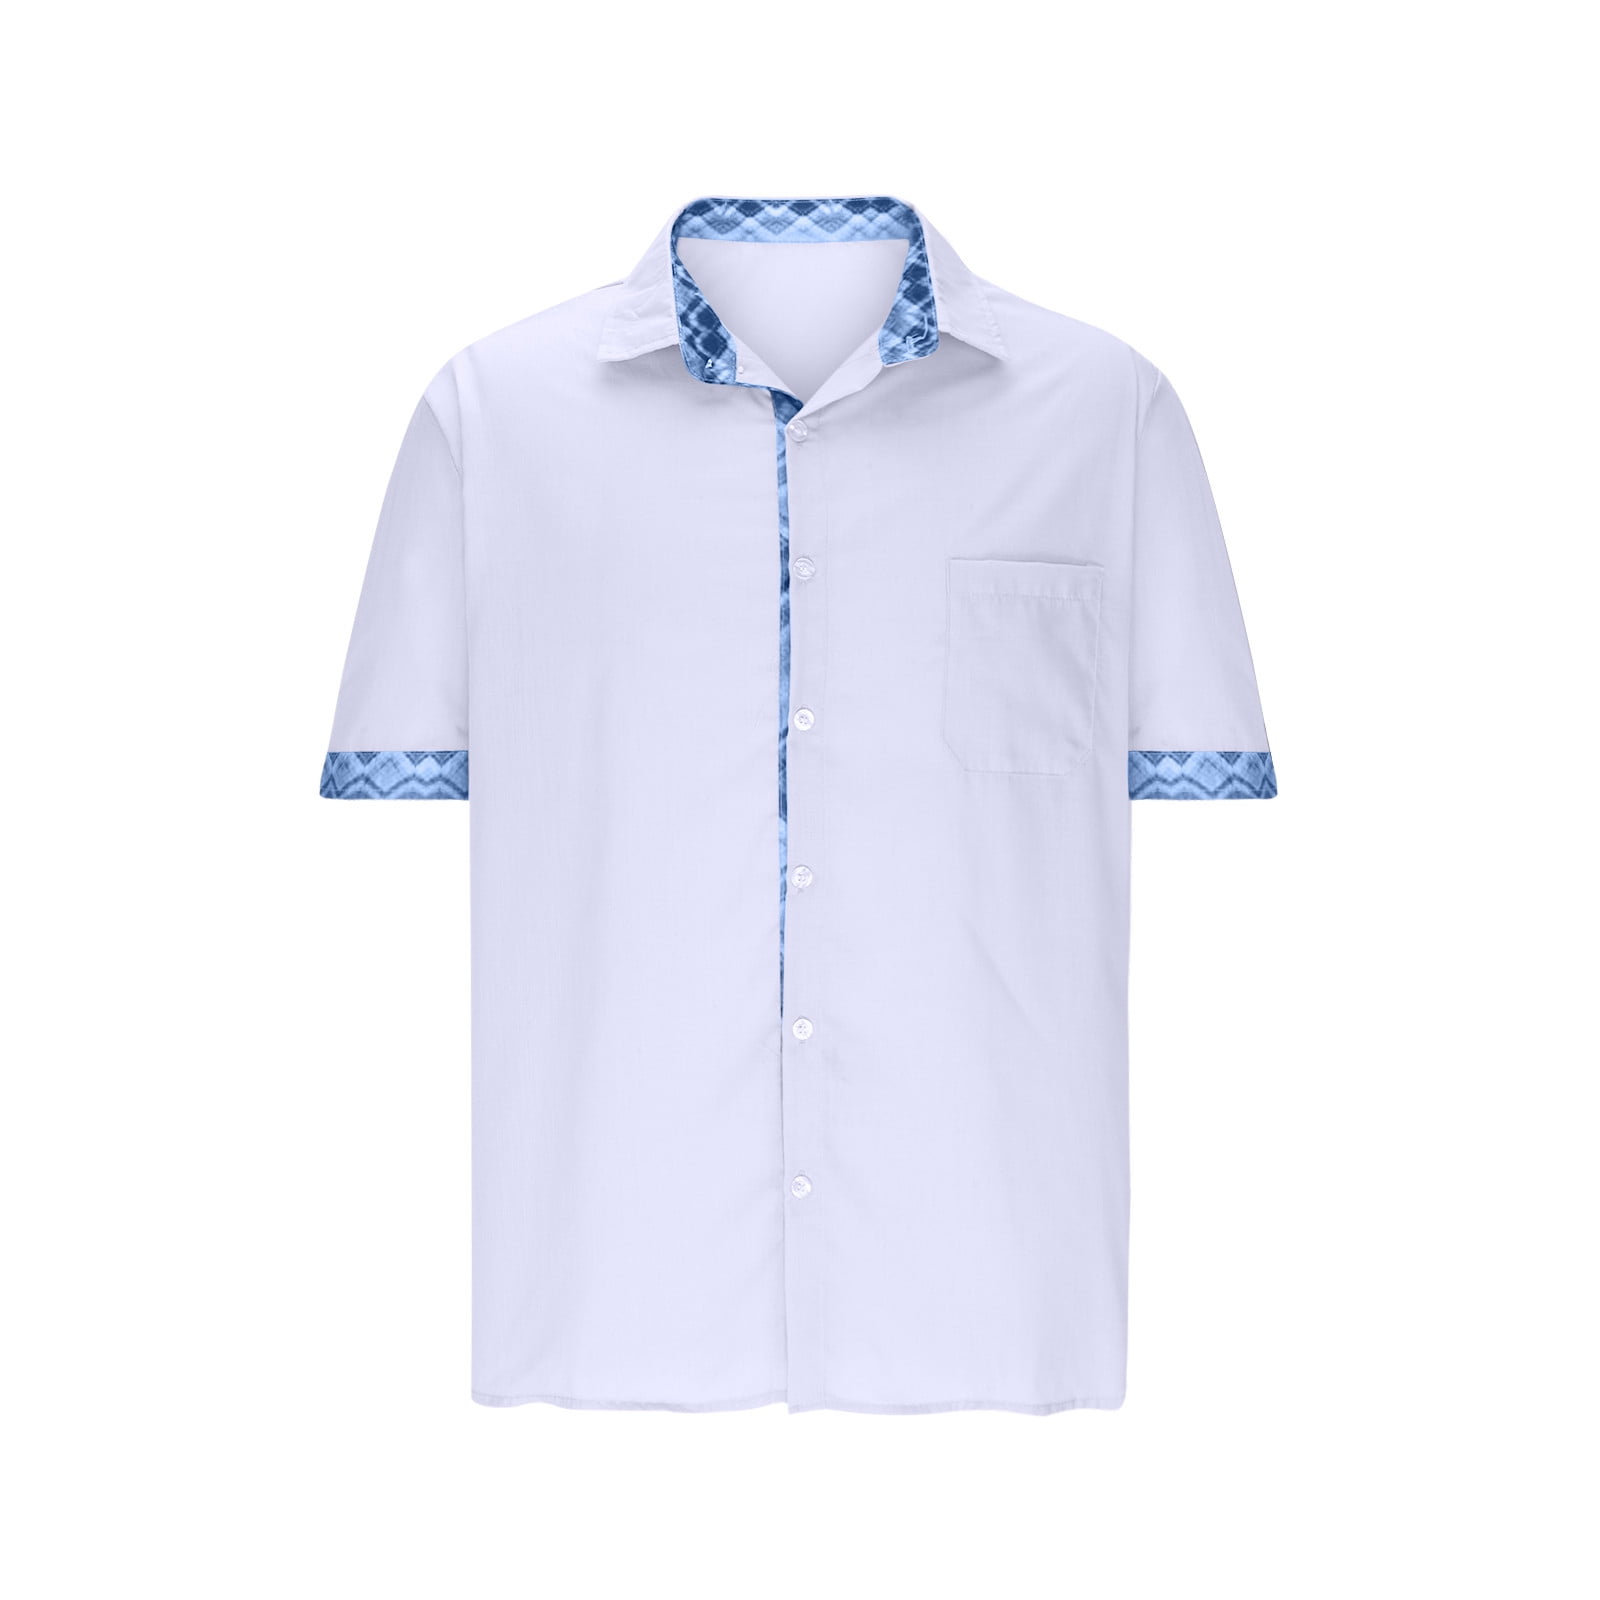 VSSSJ Men's Casual Shirts Relaxed Fit Short Sleeve Button Down